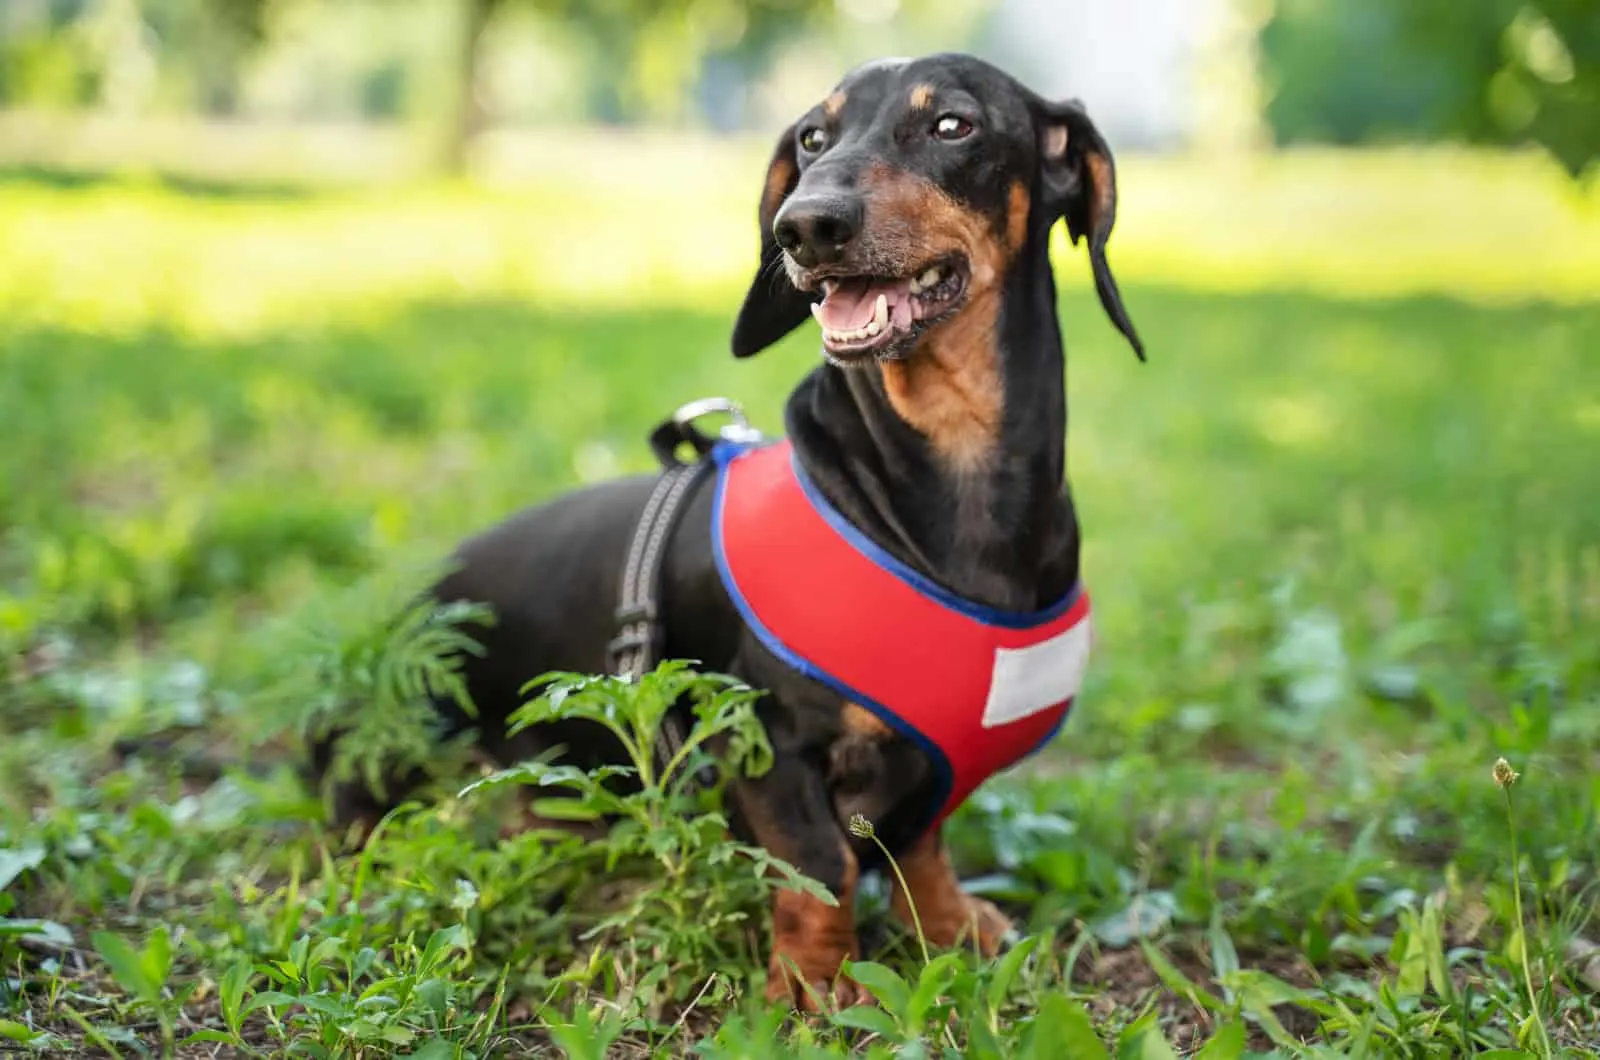 dachshund with red harness